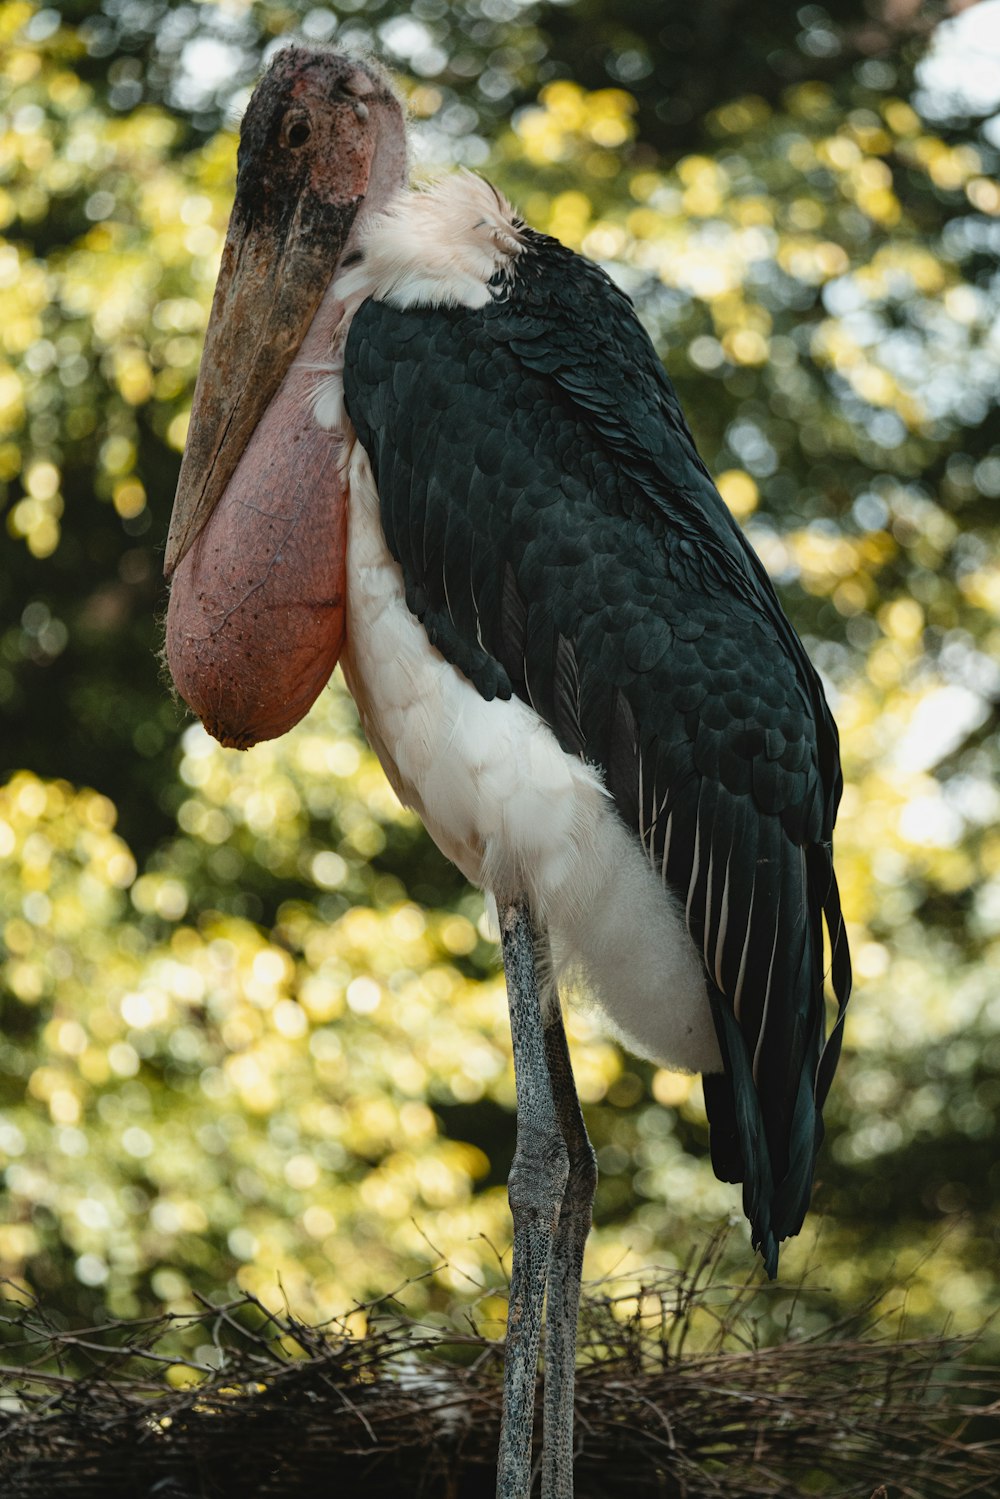 a large bird with a long neck standing on a branch